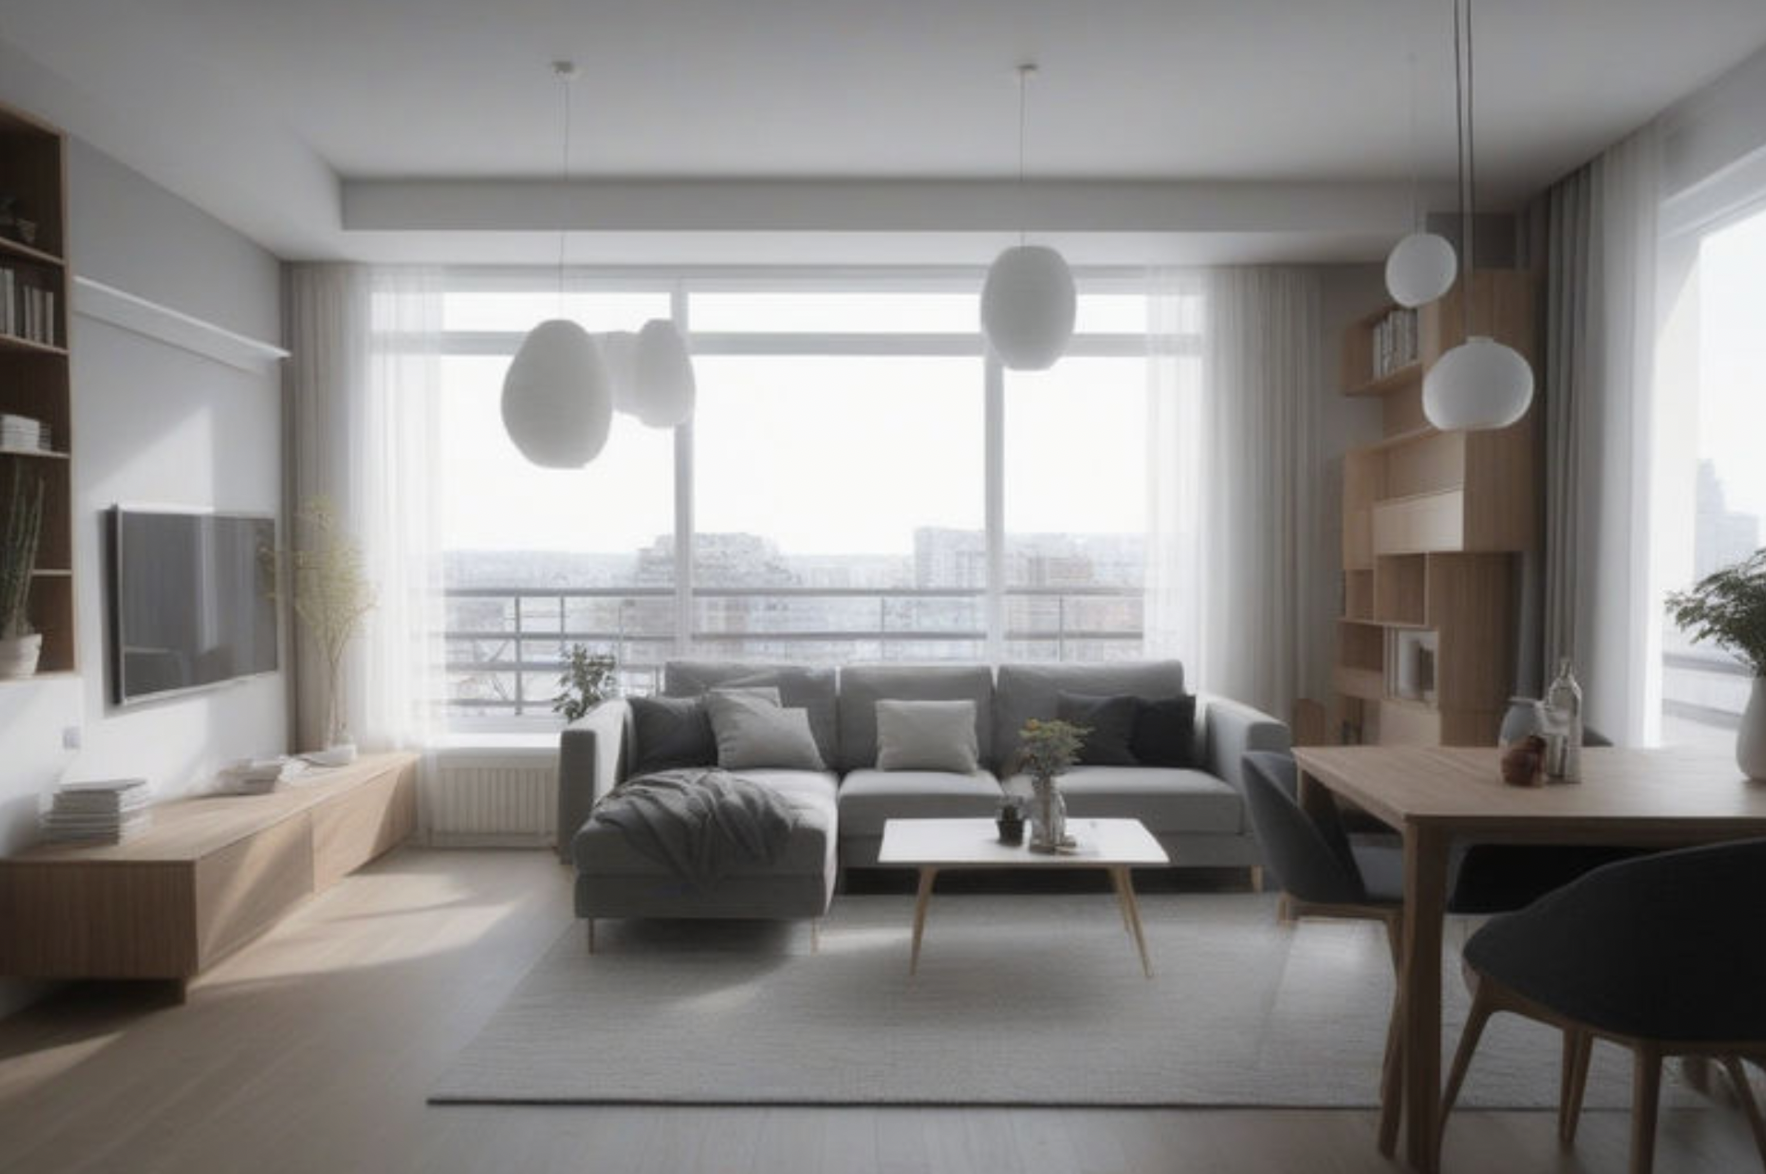 Interior design of an open floor plan layout of a NYC apartment with floor to ceiling windows